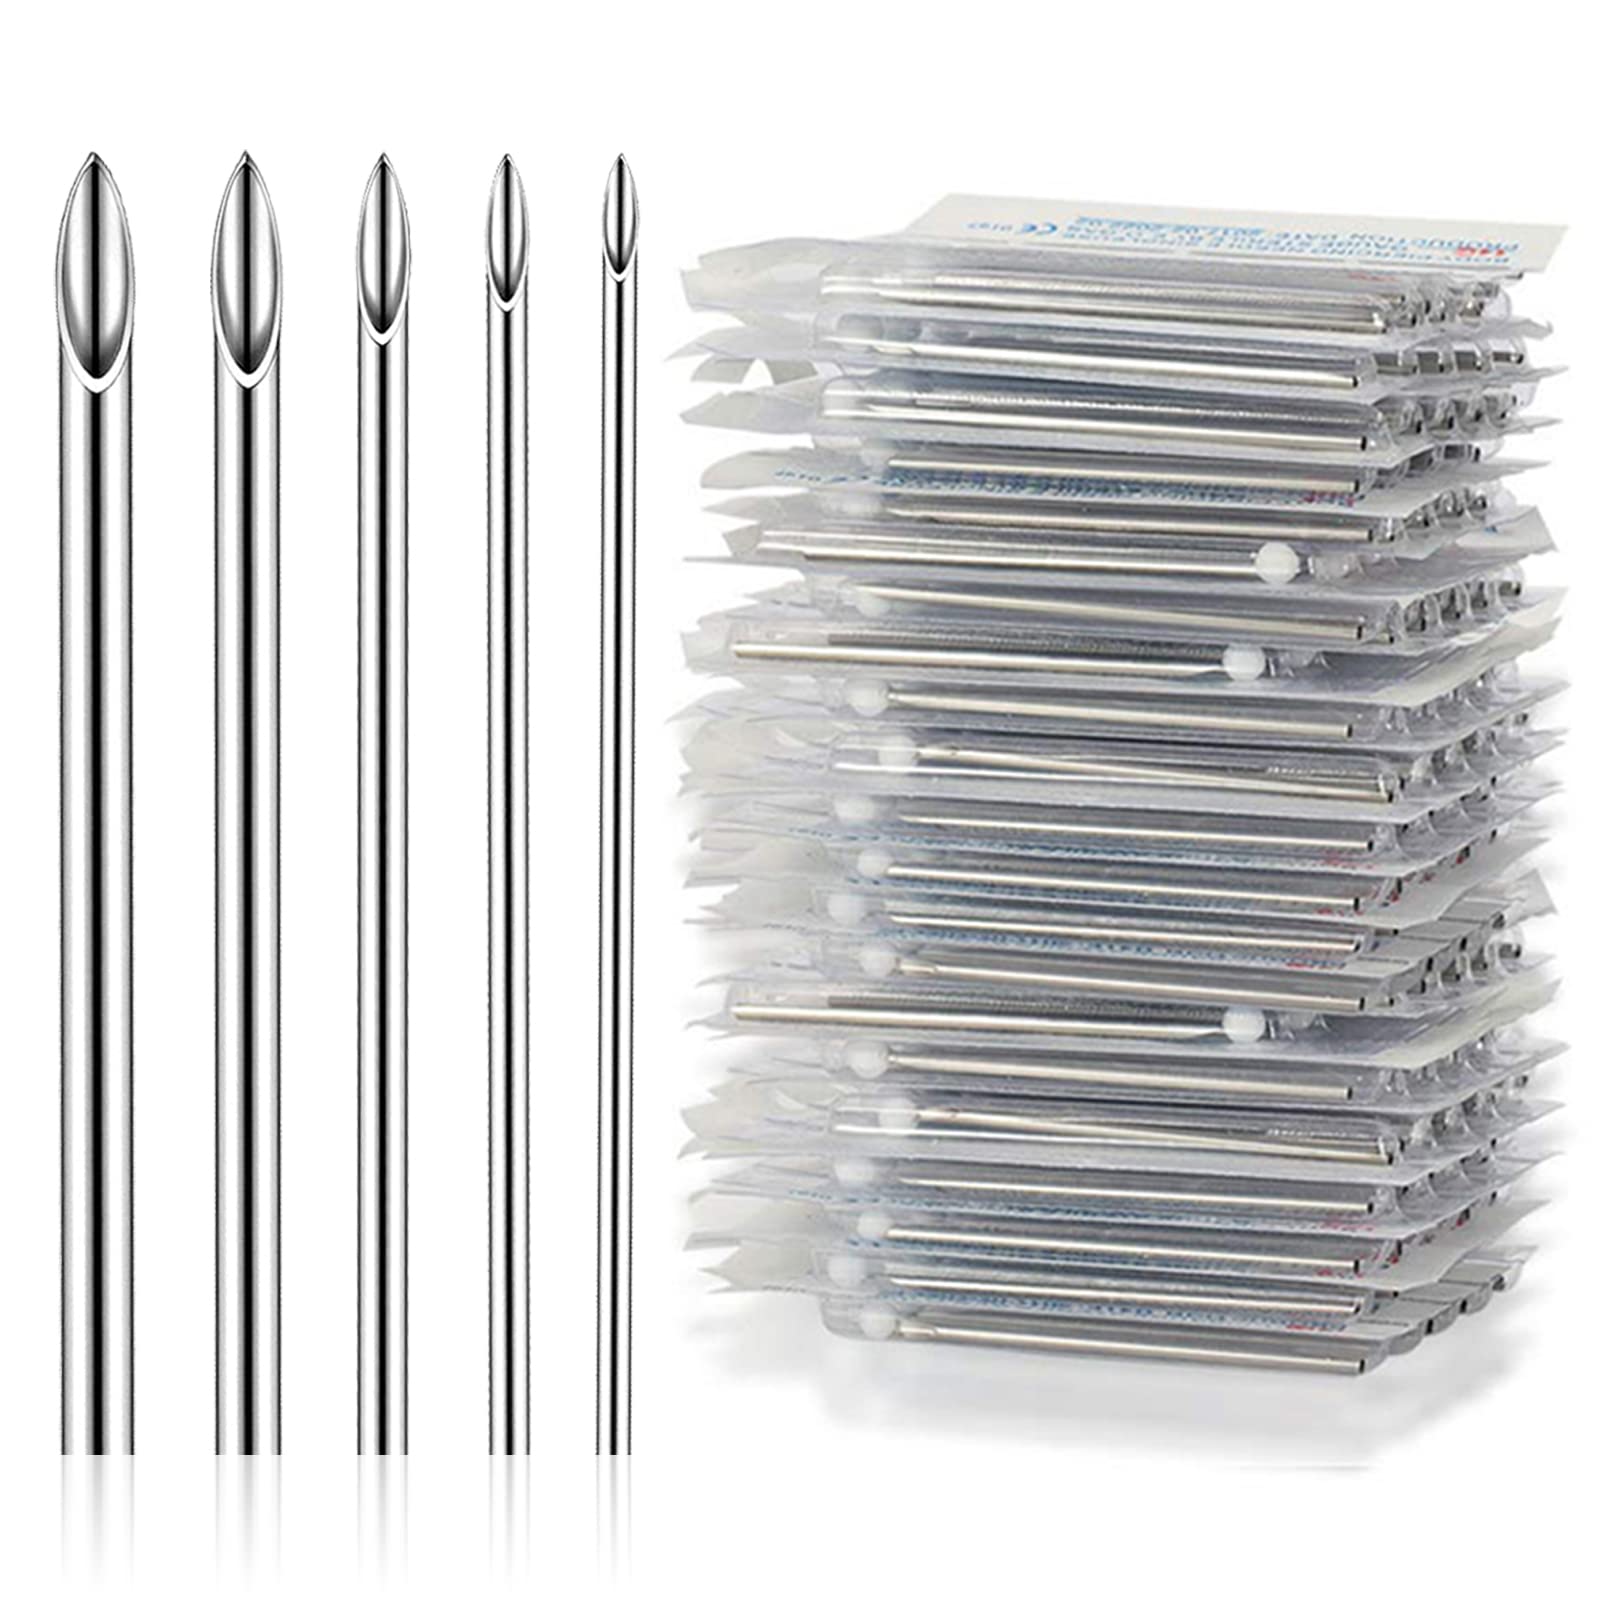 100 Pieces Body Piercing Hollow Needles with Stainless Steel Forceps Mixed  Sizes 12G 14G 16G 18G 20G Ear Piercing Needles for Belly Ear Tongue Piercing  Tools